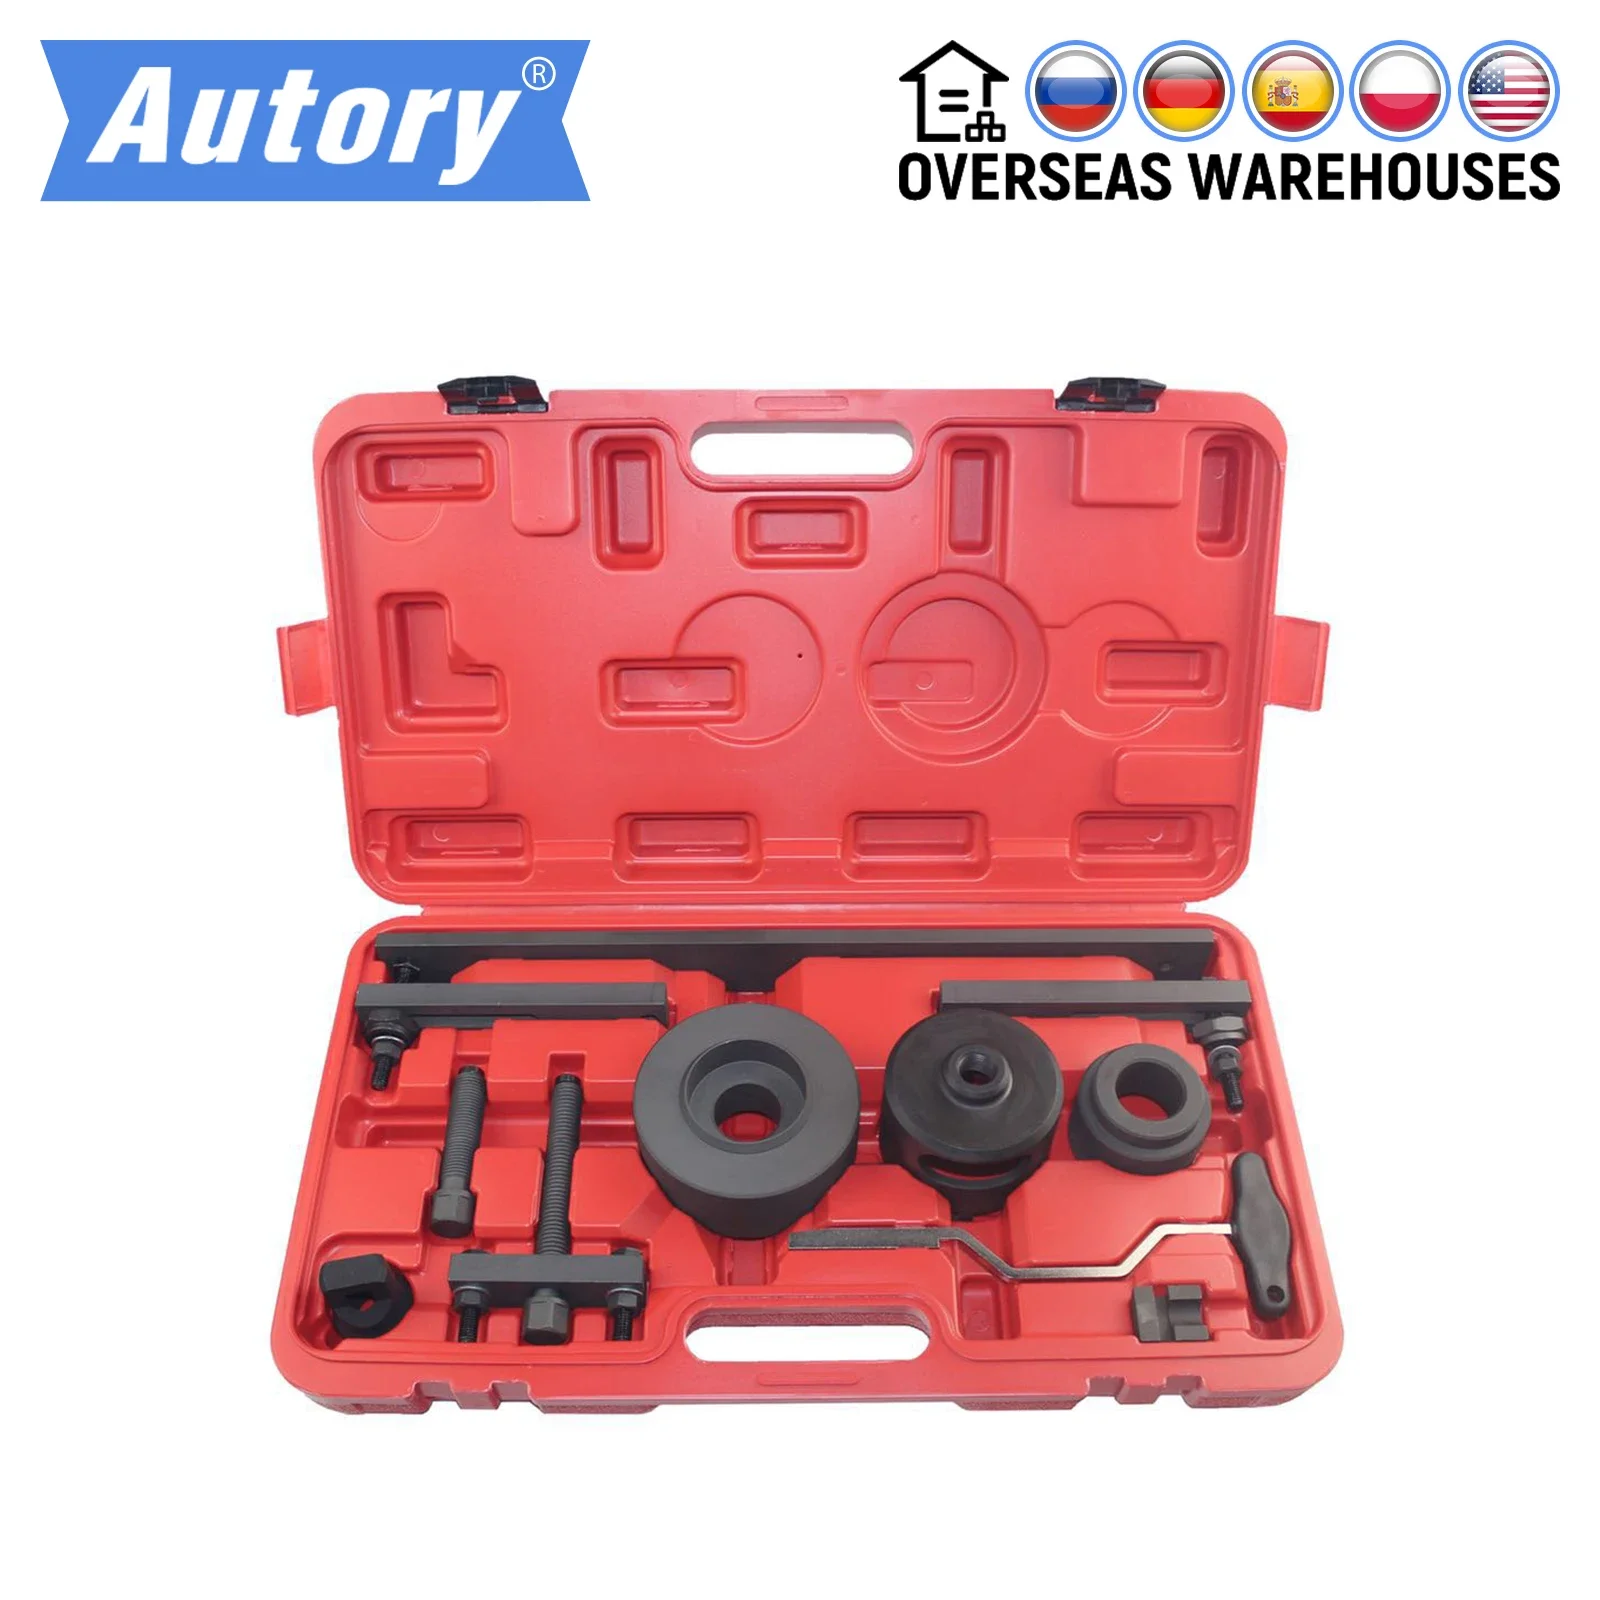 

Autory Dual Clutch DSG Gearbox Transmission Installer Remover Puller Tool Coupling Repair for VAG VW Golf Audi A3 2004 on 6&7